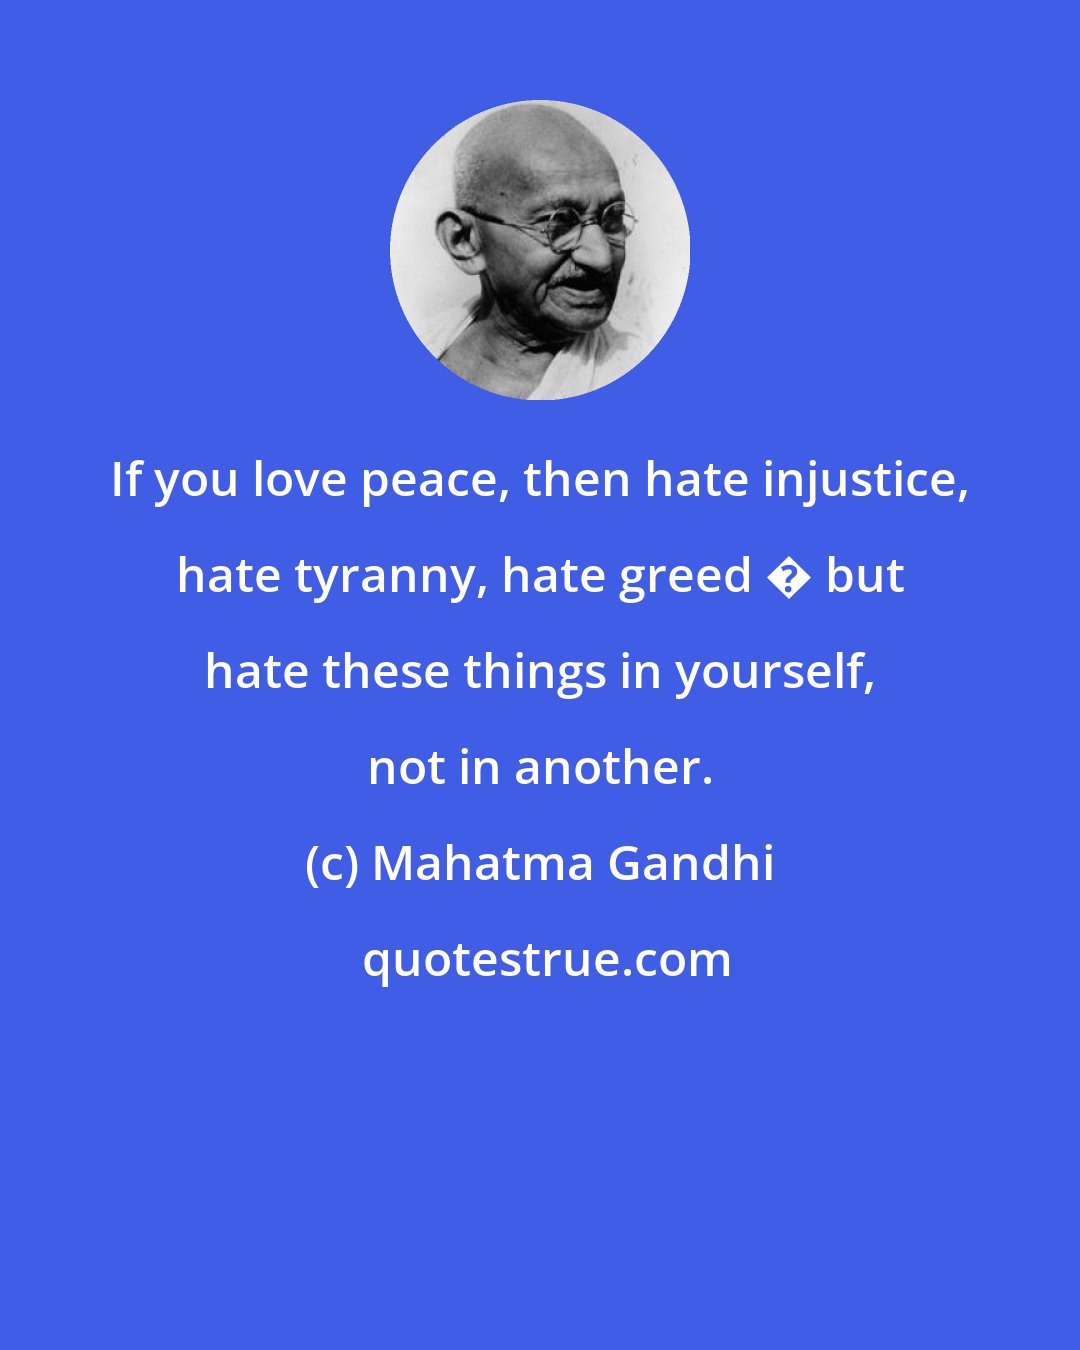 Mahatma Gandhi: If you love peace, then hate injustice, hate tyranny, hate greed � but hate these things in yourself, not in another.